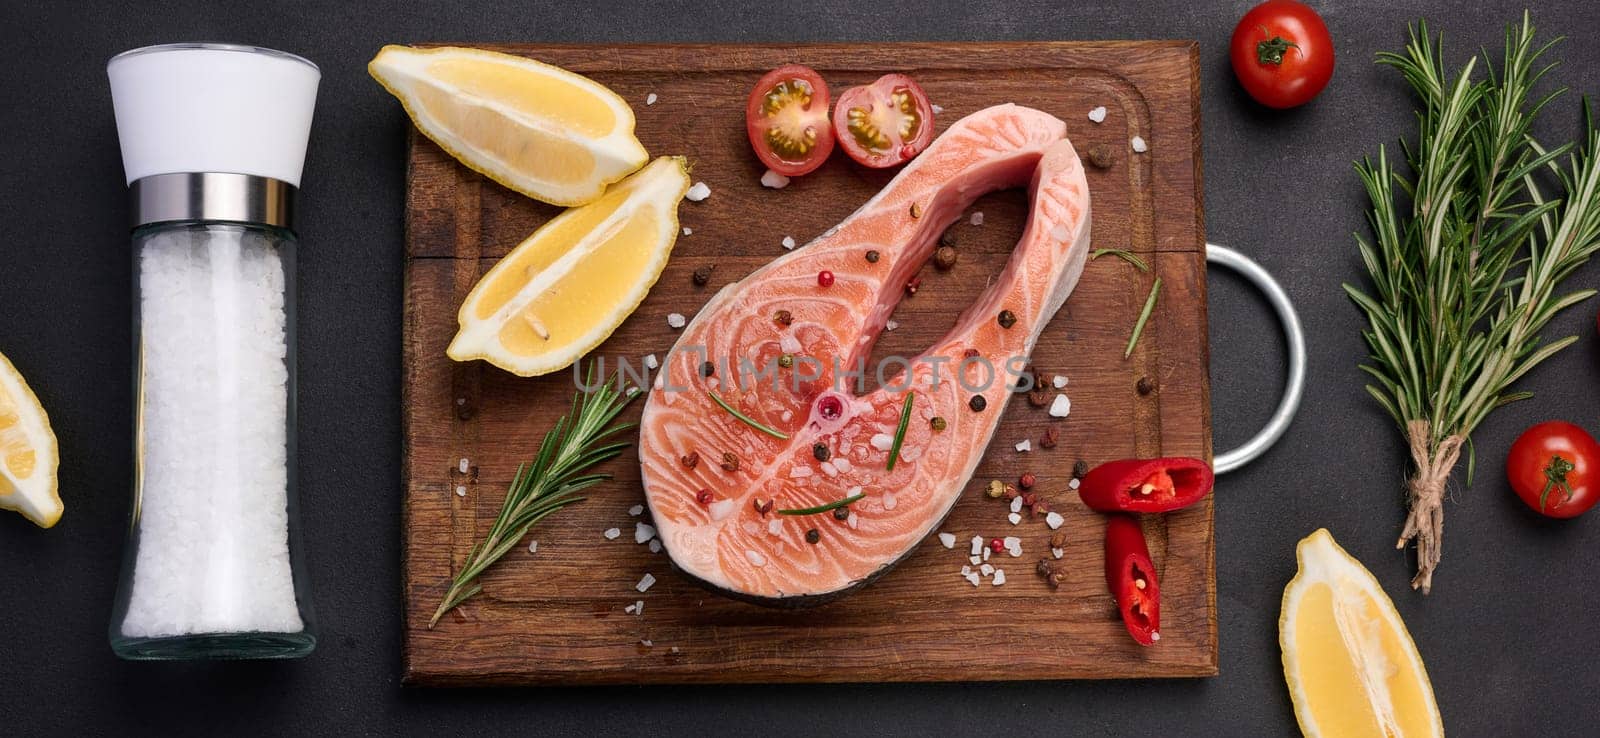 Raw salmon steak on a wooden cutting board, lemon slices, spices. Top view on black table by ndanko